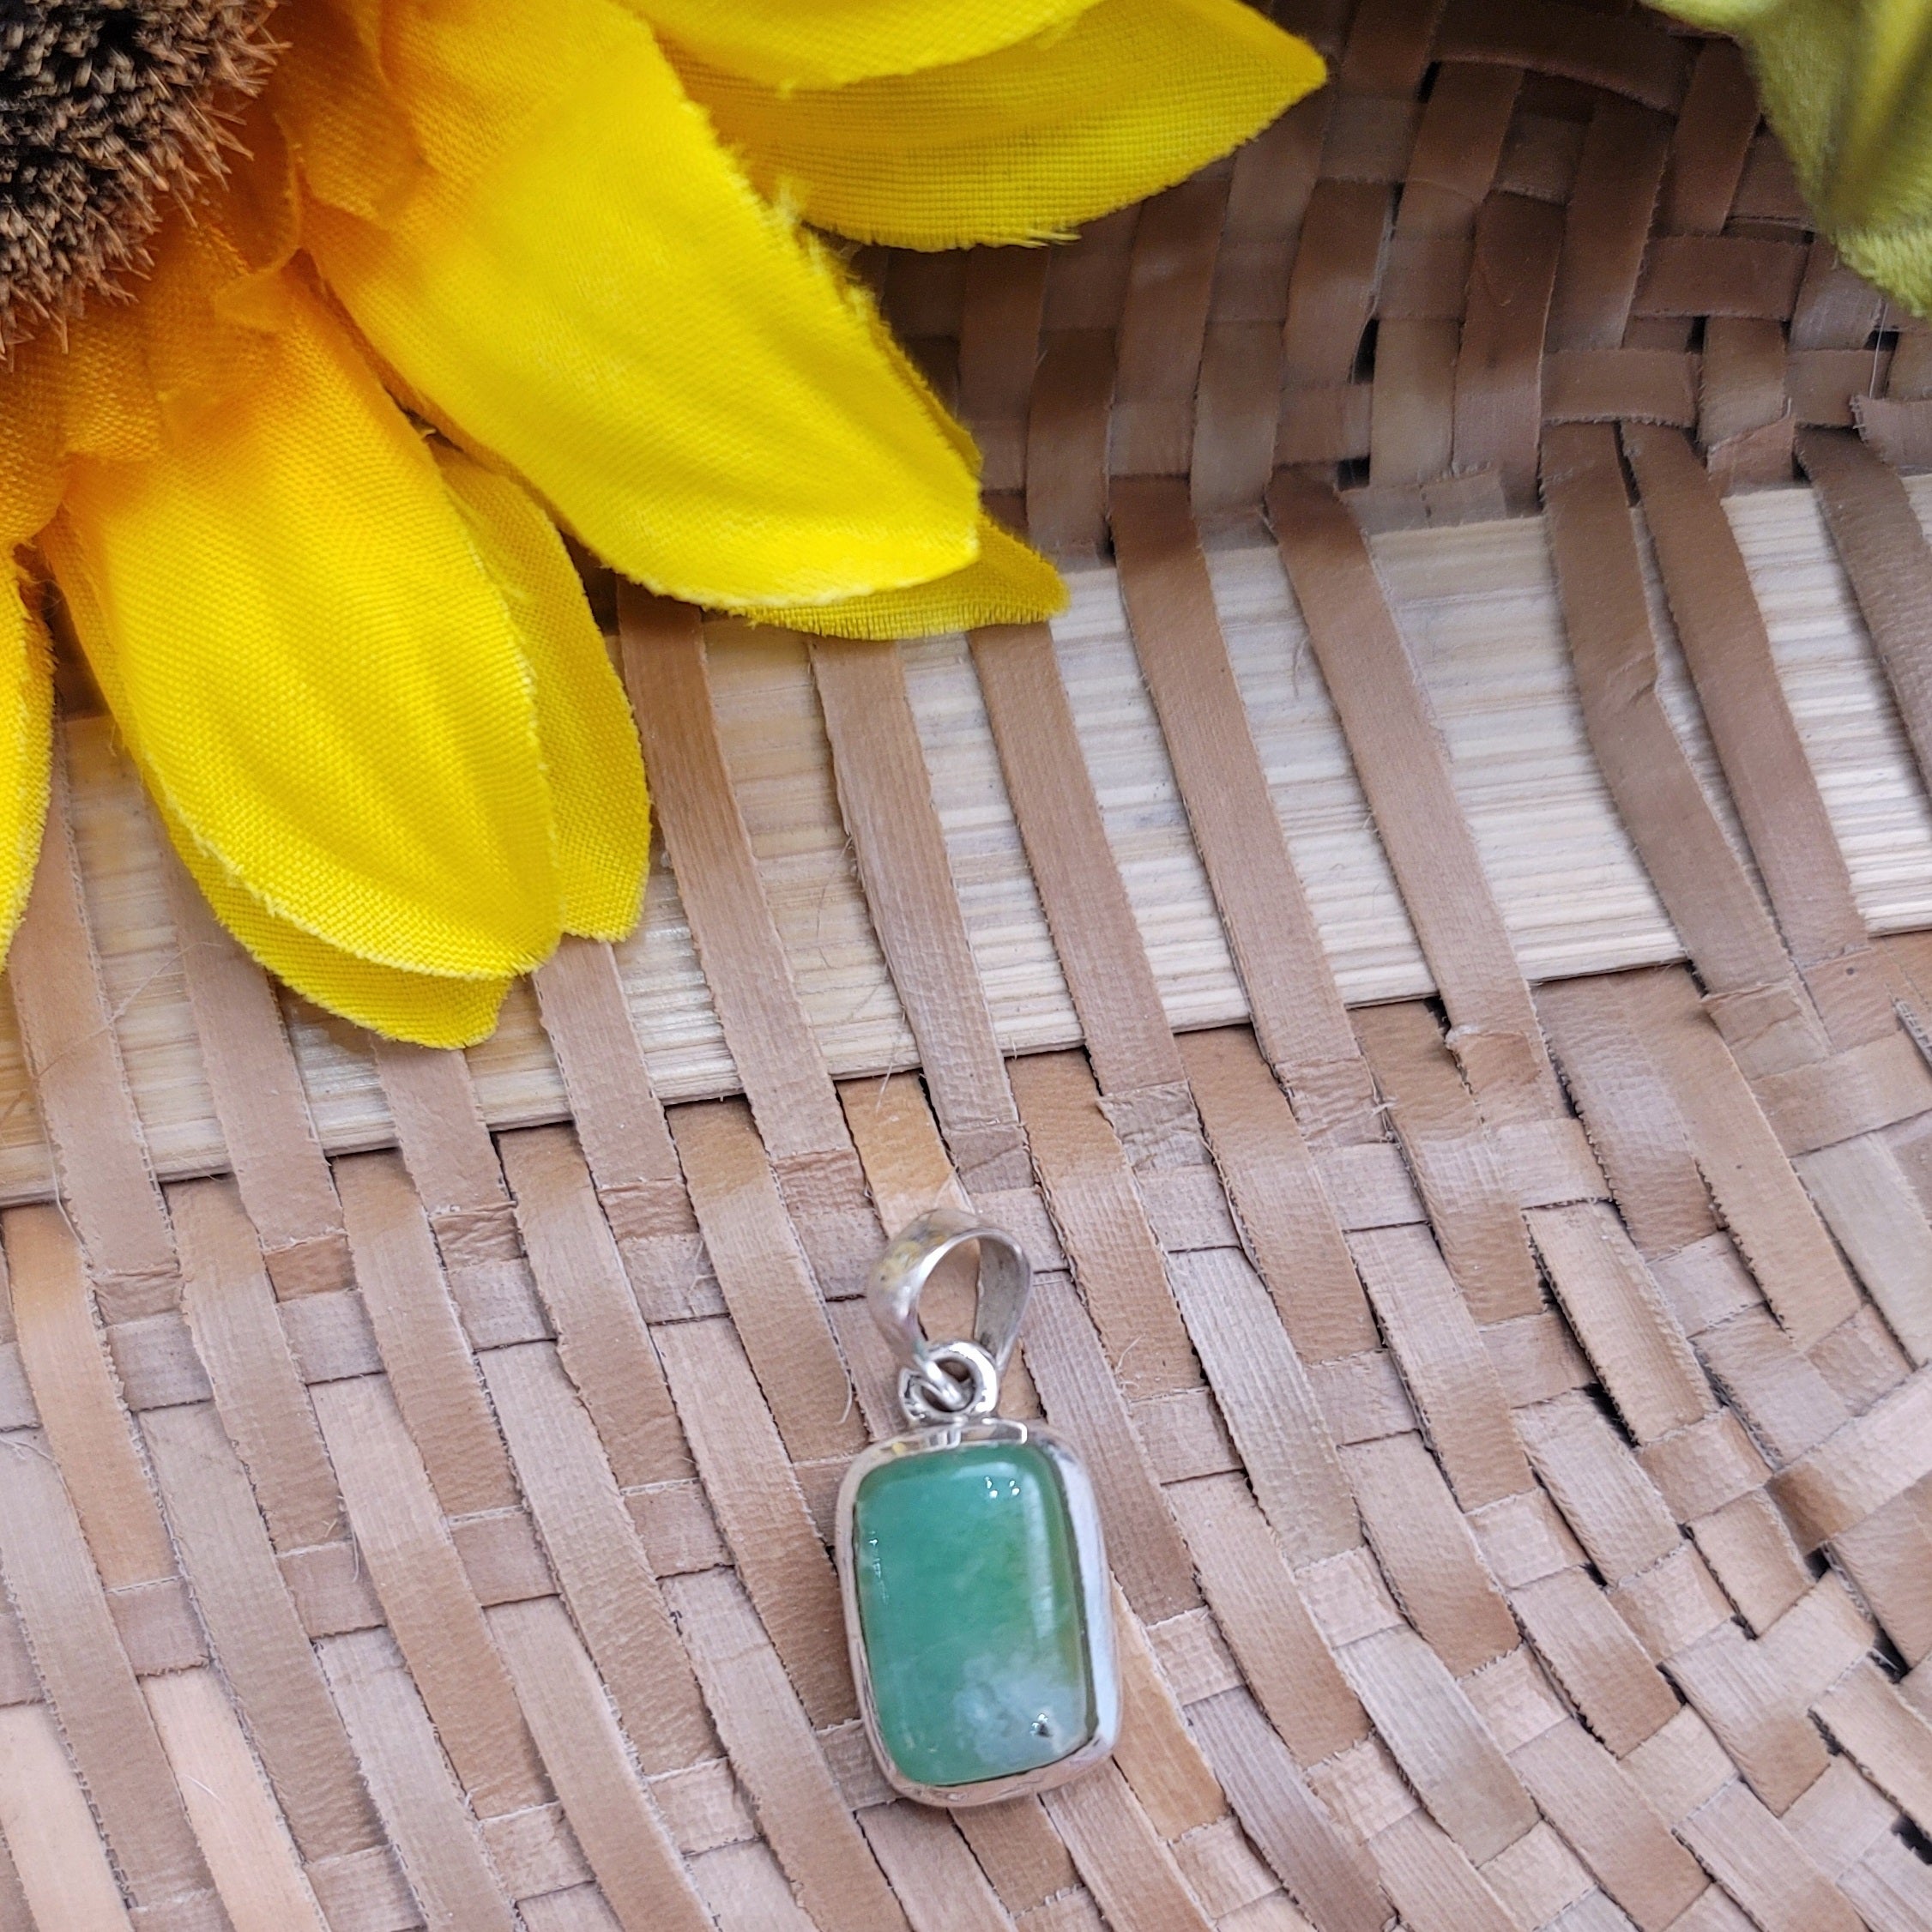 Chrysoprase Pendant .925 Silver for Heart Healing, Growth & Rebirth